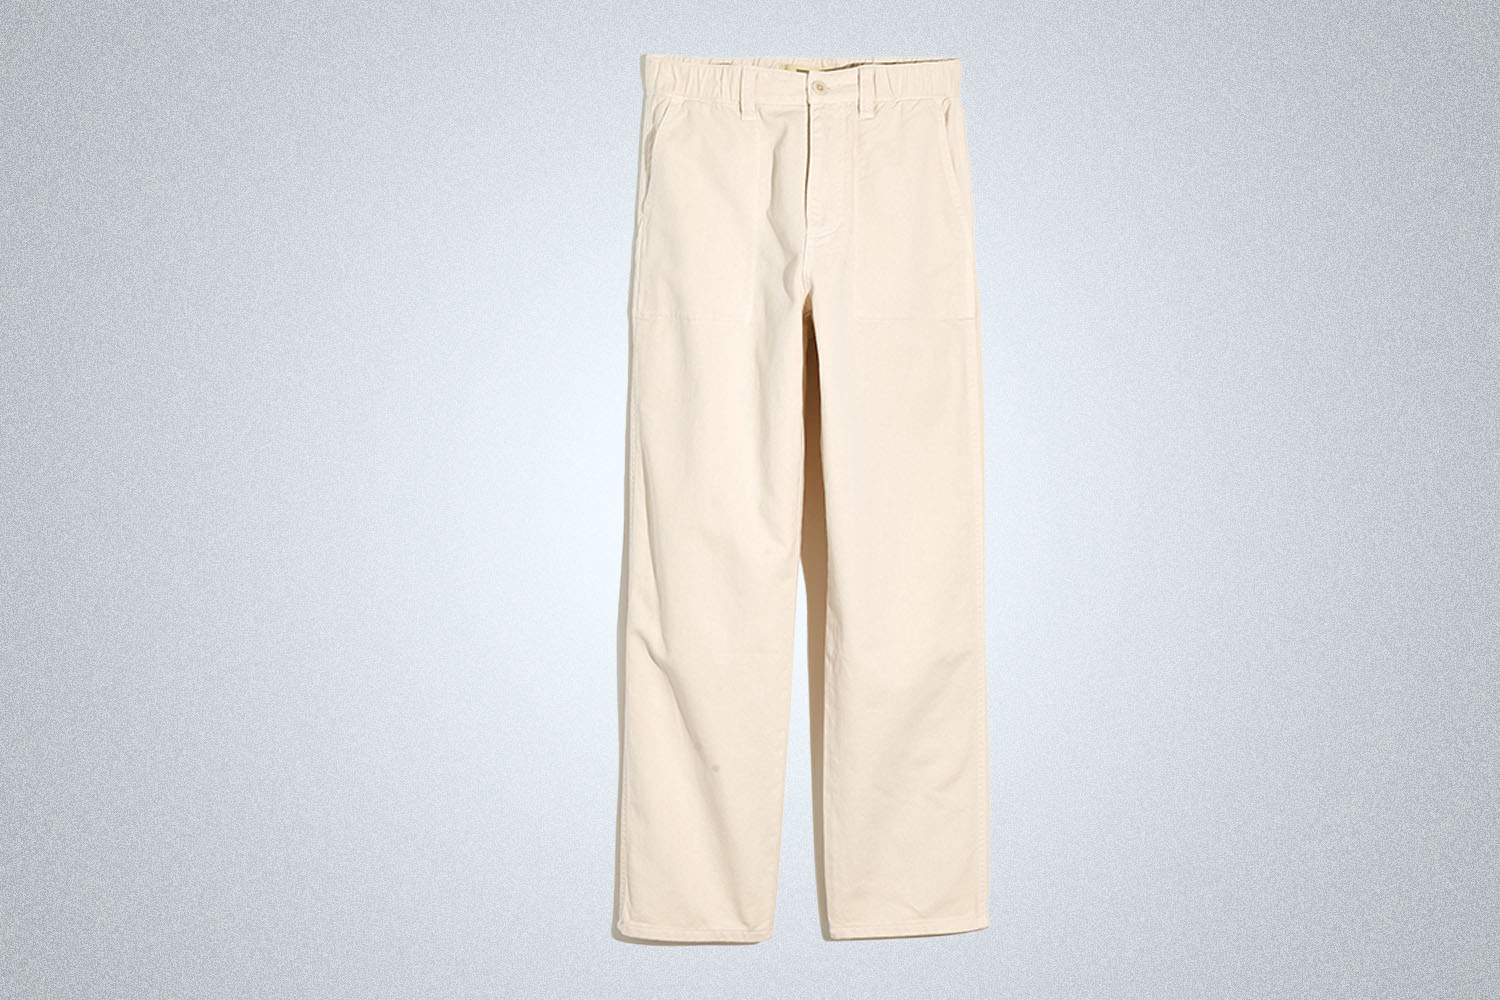 a pair of off white Everyday Pants from Madewell on a grey background